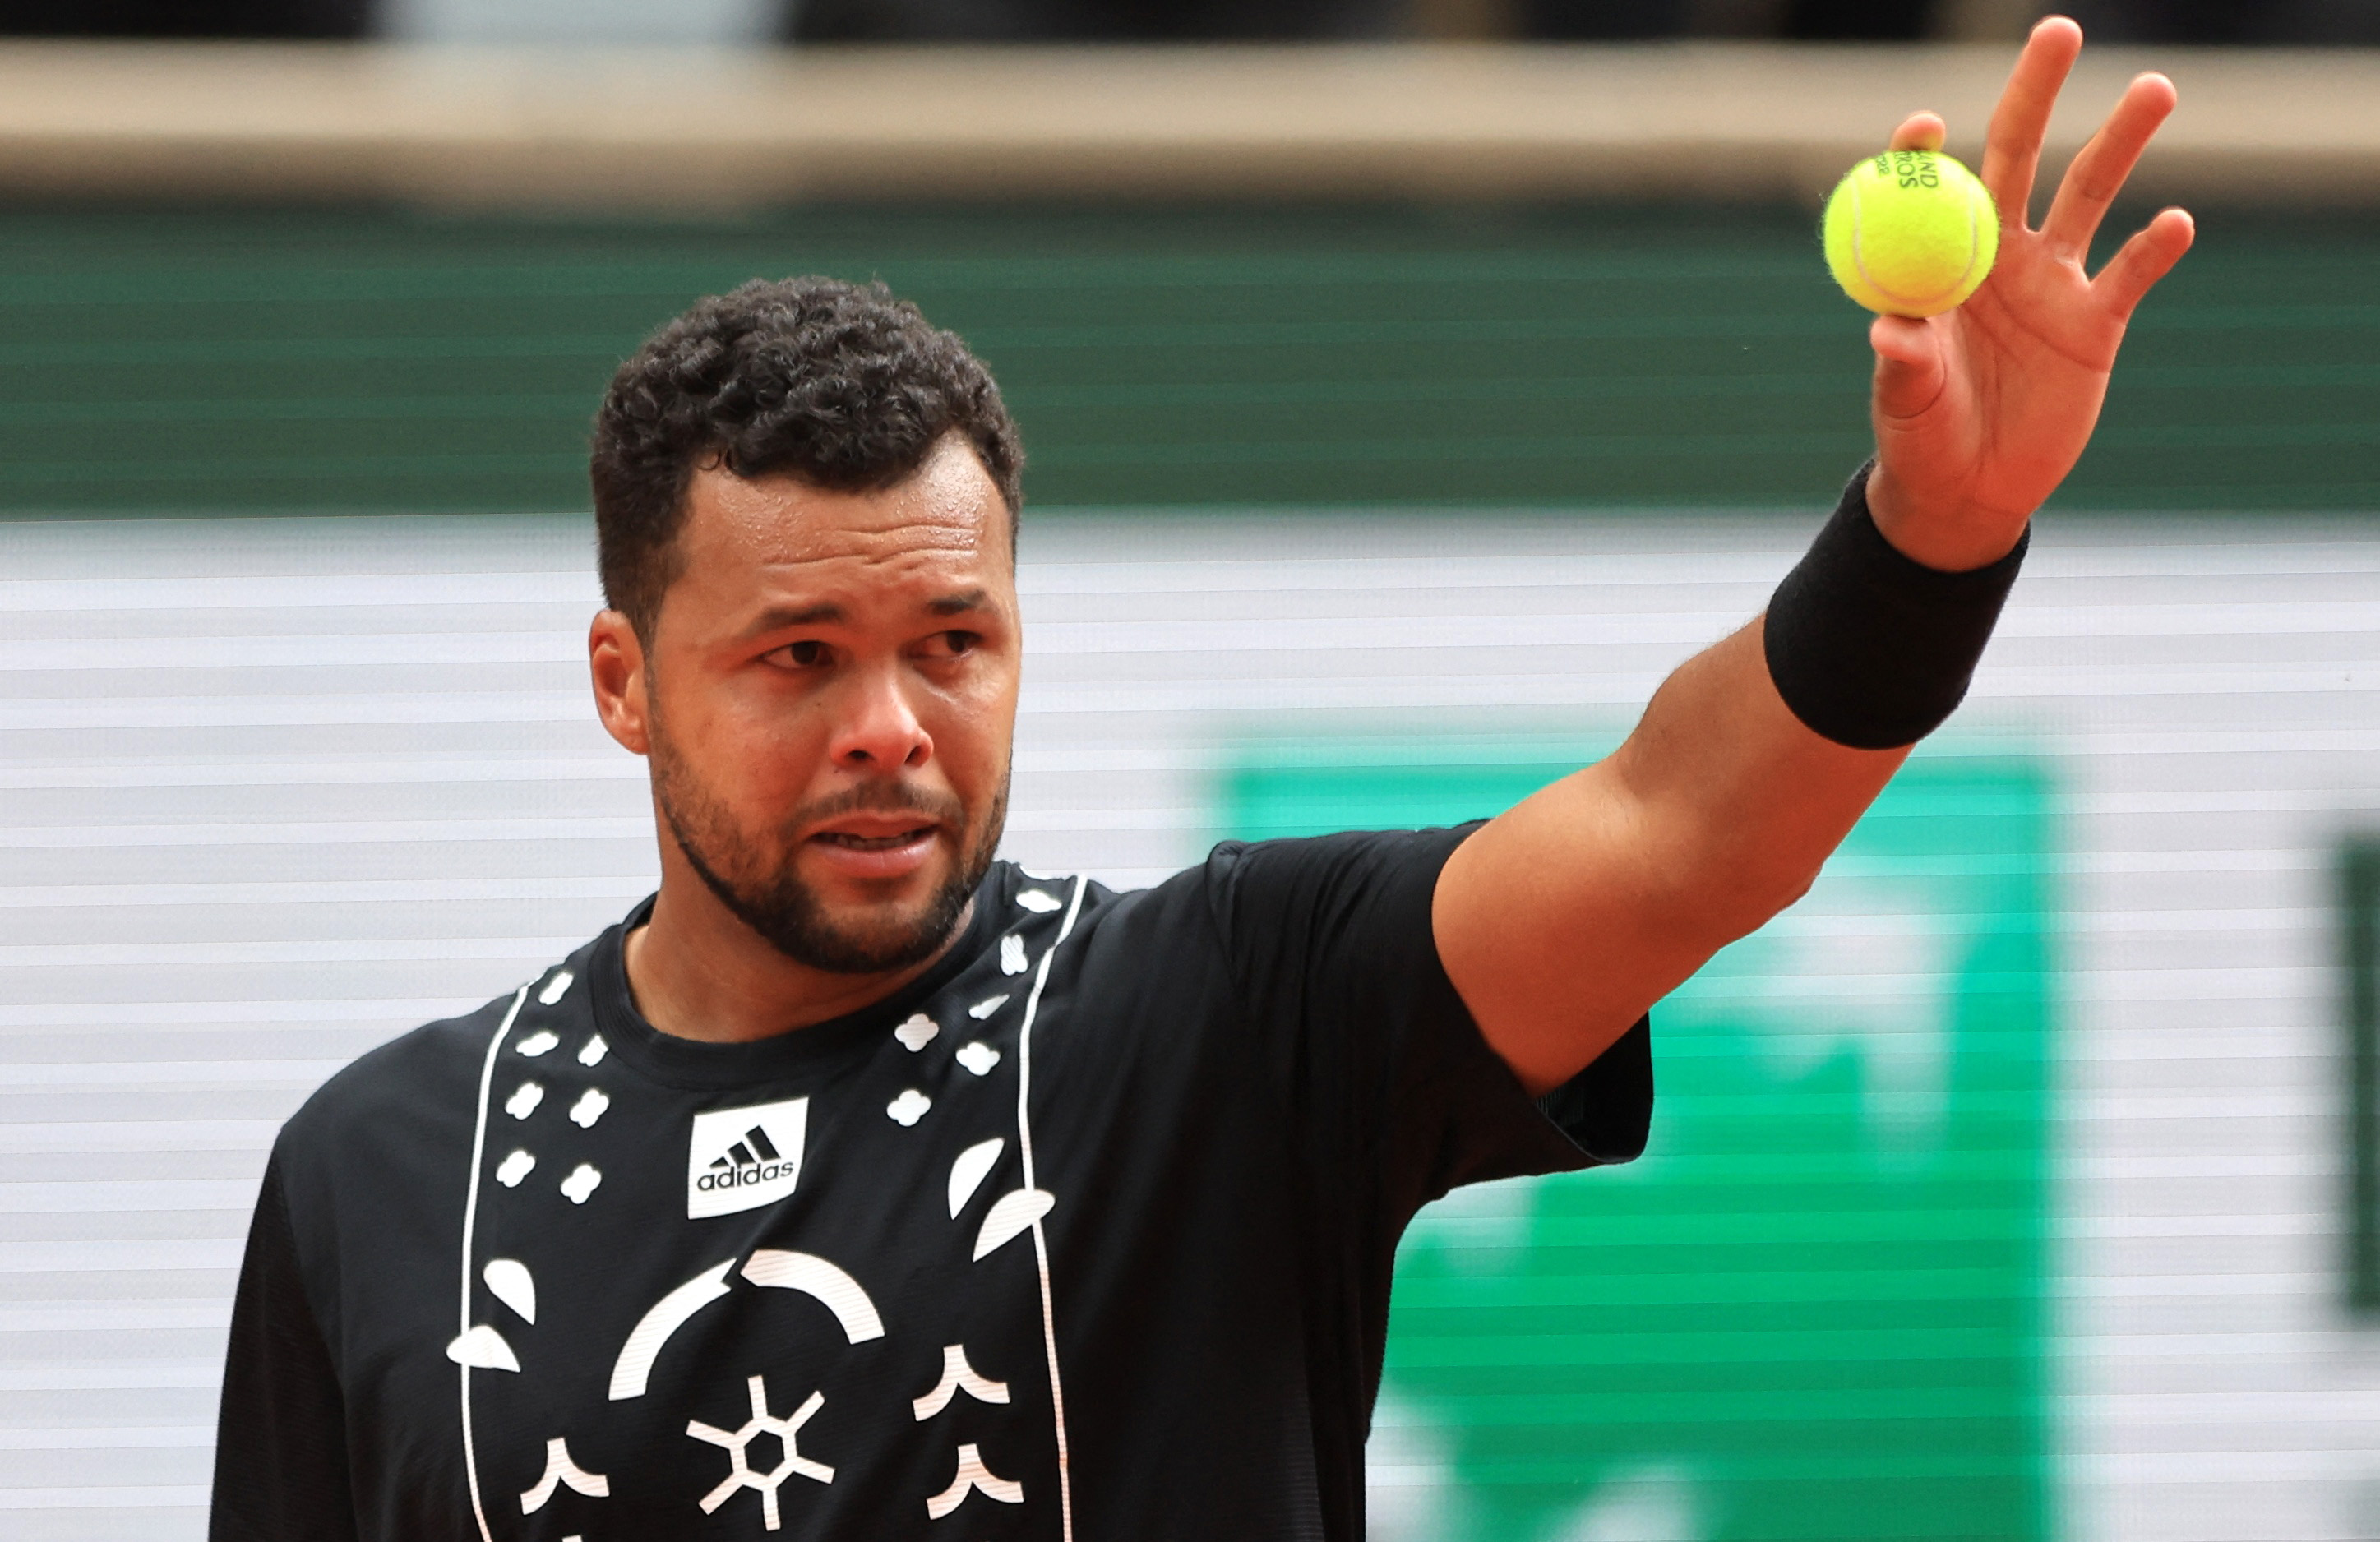 Simon draws inspiration from Tsonga in gruelling French Open win | Reuters